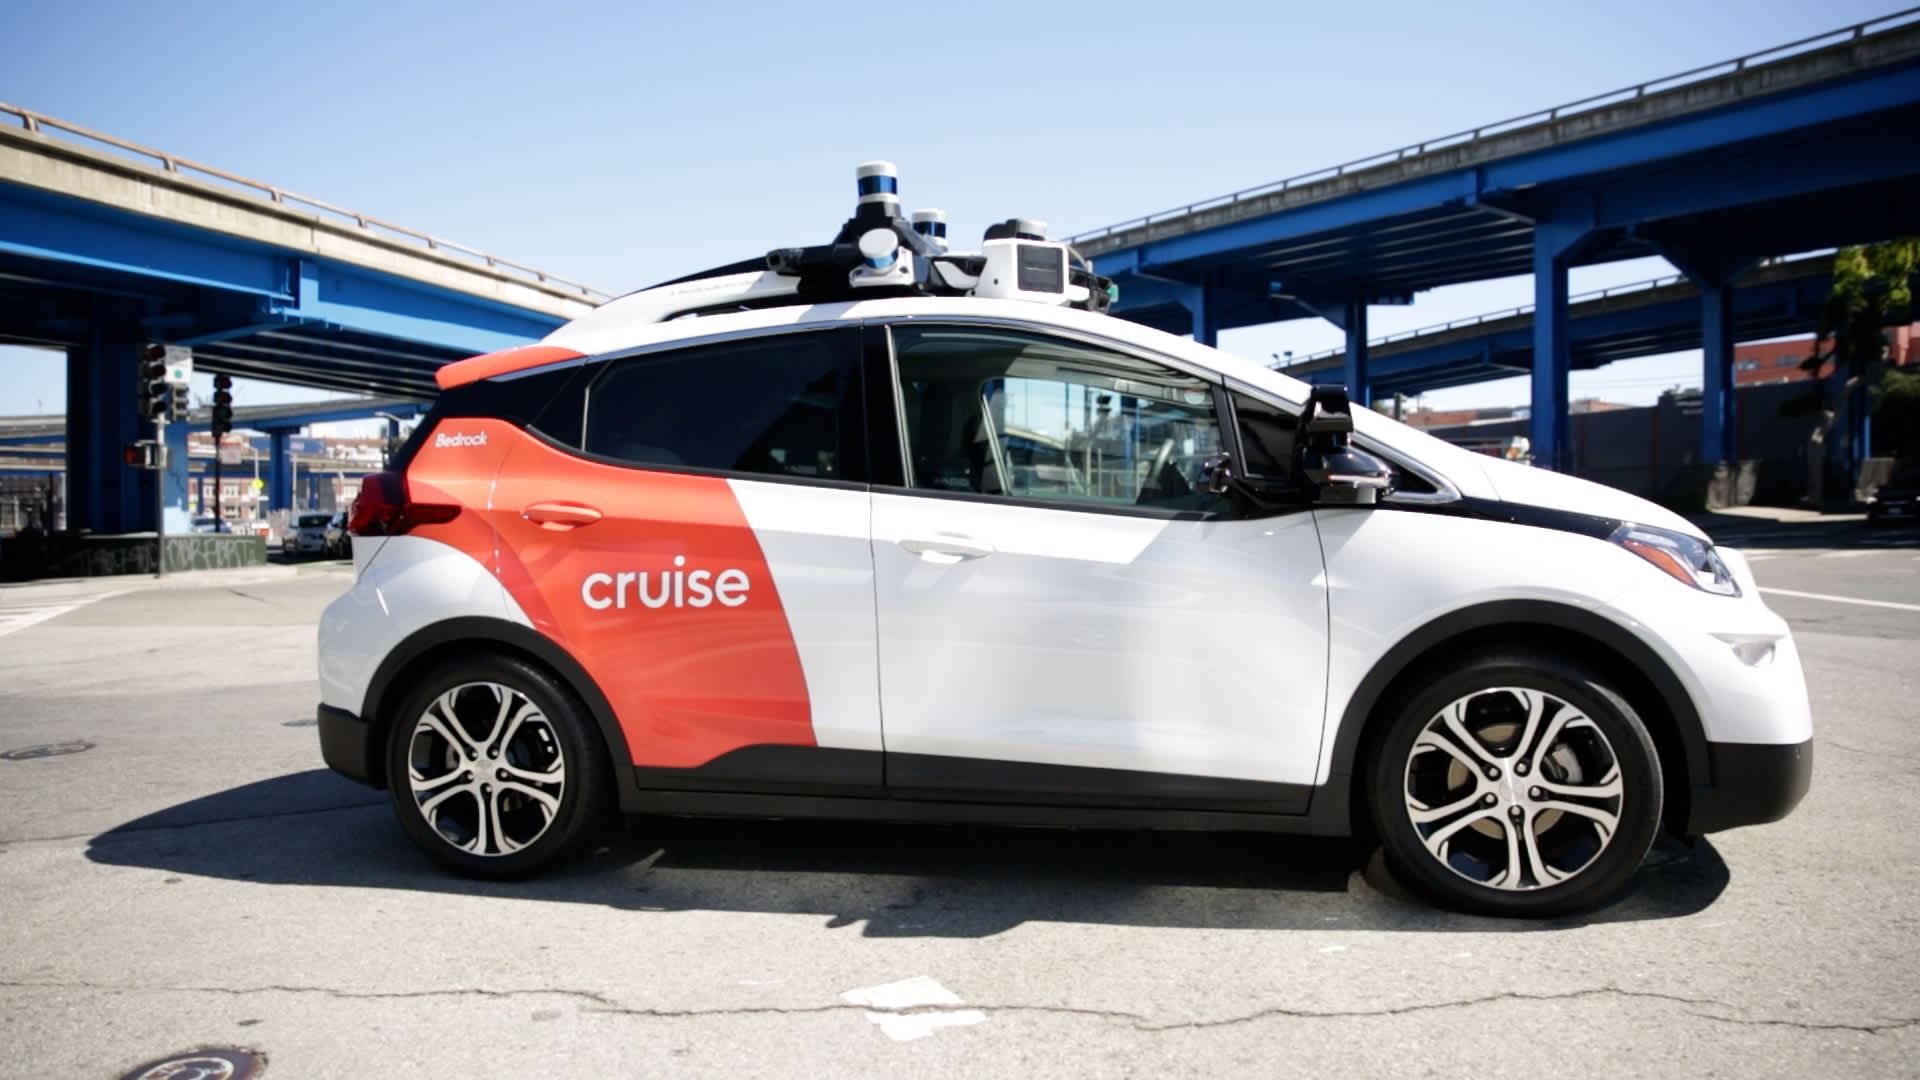 Why San Francisco’s driverless taxi rollout has been such a mess